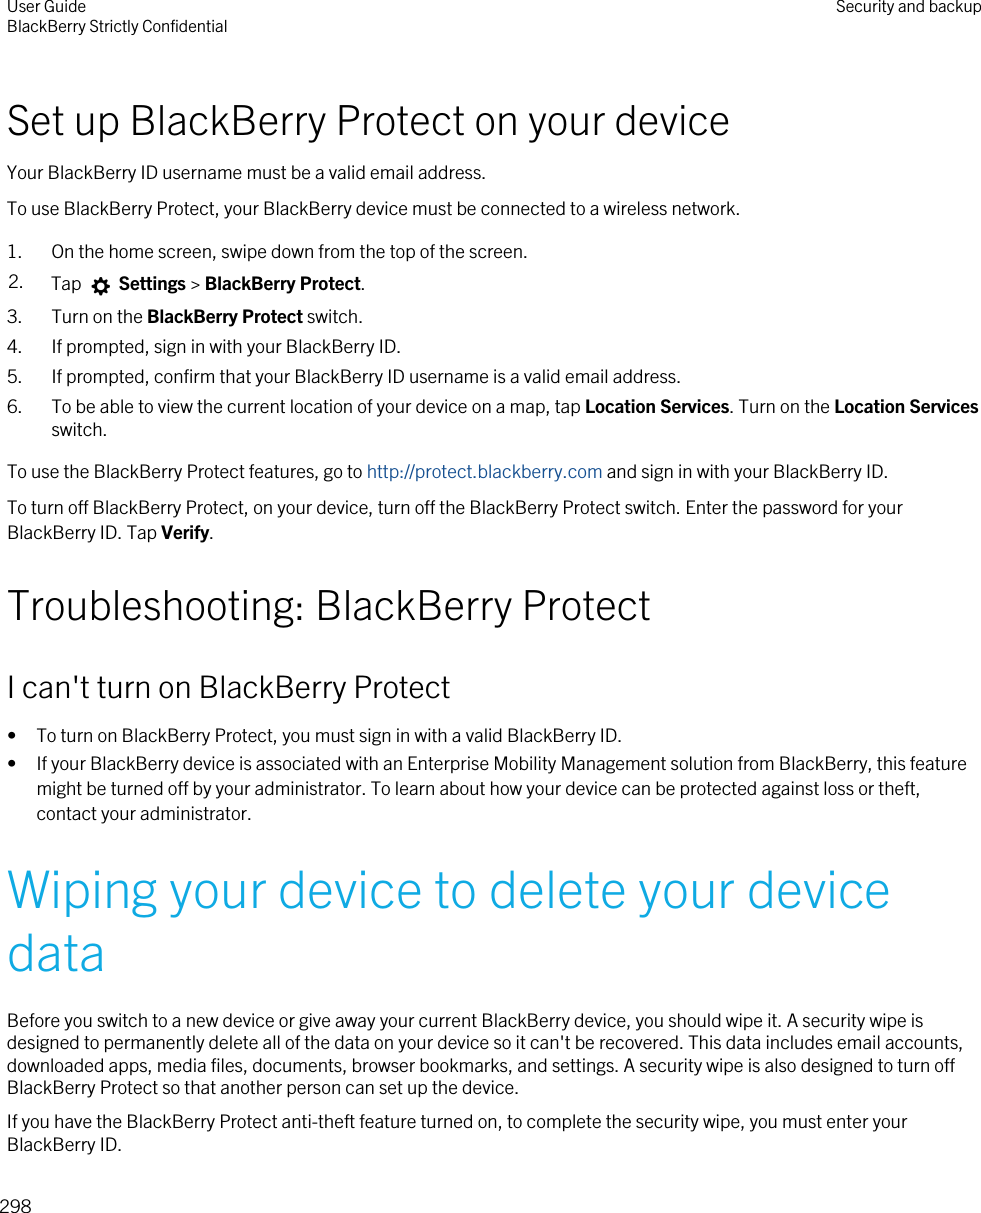 Set up BlackBerry Protect on your deviceYour BlackBerry ID username must be a valid email address.To use BlackBerry Protect, your BlackBerry device must be connected to a wireless network.1. On the home screen, swipe down from the top of the screen.2. Tap   Settings &gt; BlackBerry Protect.3. Turn on the BlackBerry Protect switch.4. If prompted, sign in with your BlackBerry ID.5. If prompted, confirm that your BlackBerry ID username is a valid email address.6. To be able to view the current location of your device on a map, tap Location Services. Turn on the Location Services switch.To use the BlackBerry Protect features, go to http://protect.blackberry.com and sign in with your BlackBerry ID.To turn off BlackBerry Protect, on your device, turn off the BlackBerry Protect switch. Enter the password for your BlackBerry ID. Tap Verify.Troubleshooting: BlackBerry ProtectI can&apos;t turn on BlackBerry Protect• To turn on BlackBerry Protect, you must sign in with a valid BlackBerry ID.• If your BlackBerry device is associated with an Enterprise Mobility Management solution from BlackBerry, this feature might be turned off by your administrator. To learn about how your device can be protected against loss or theft, contact your administrator.Wiping your device to delete your device dataBefore you switch to a new device or give away your current BlackBerry device, you should wipe it. A security wipe is designed to permanently delete all of the data on your device so it can&apos;t be recovered. This data includes email accounts, downloaded apps, media files, documents, browser bookmarks, and settings. A security wipe is also designed to turn off BlackBerry Protect so that another person can set up the device.If you have the BlackBerry Protect anti-theft feature turned on, to complete the security wipe, you must enter your BlackBerry ID.User GuideBlackBerry Strictly Confidential Security and backup298